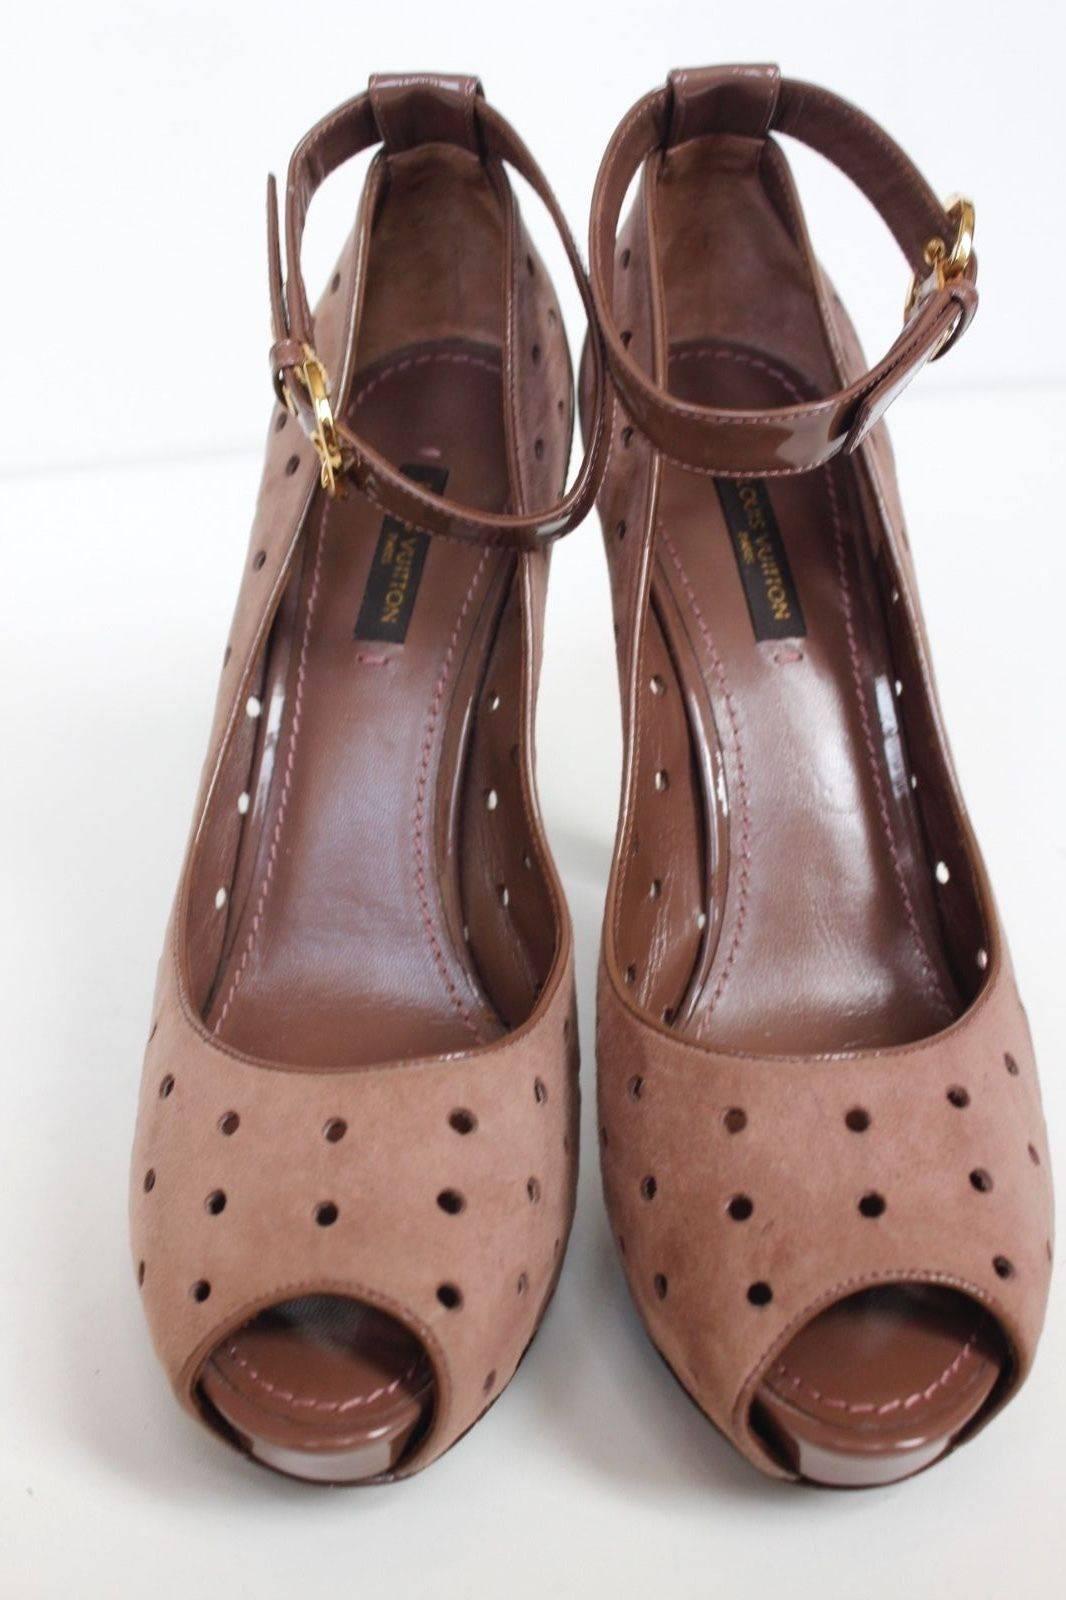 Brown LOUIS VUITTON Mauve Suede Perforated Pumps Heels 38 uk 5  